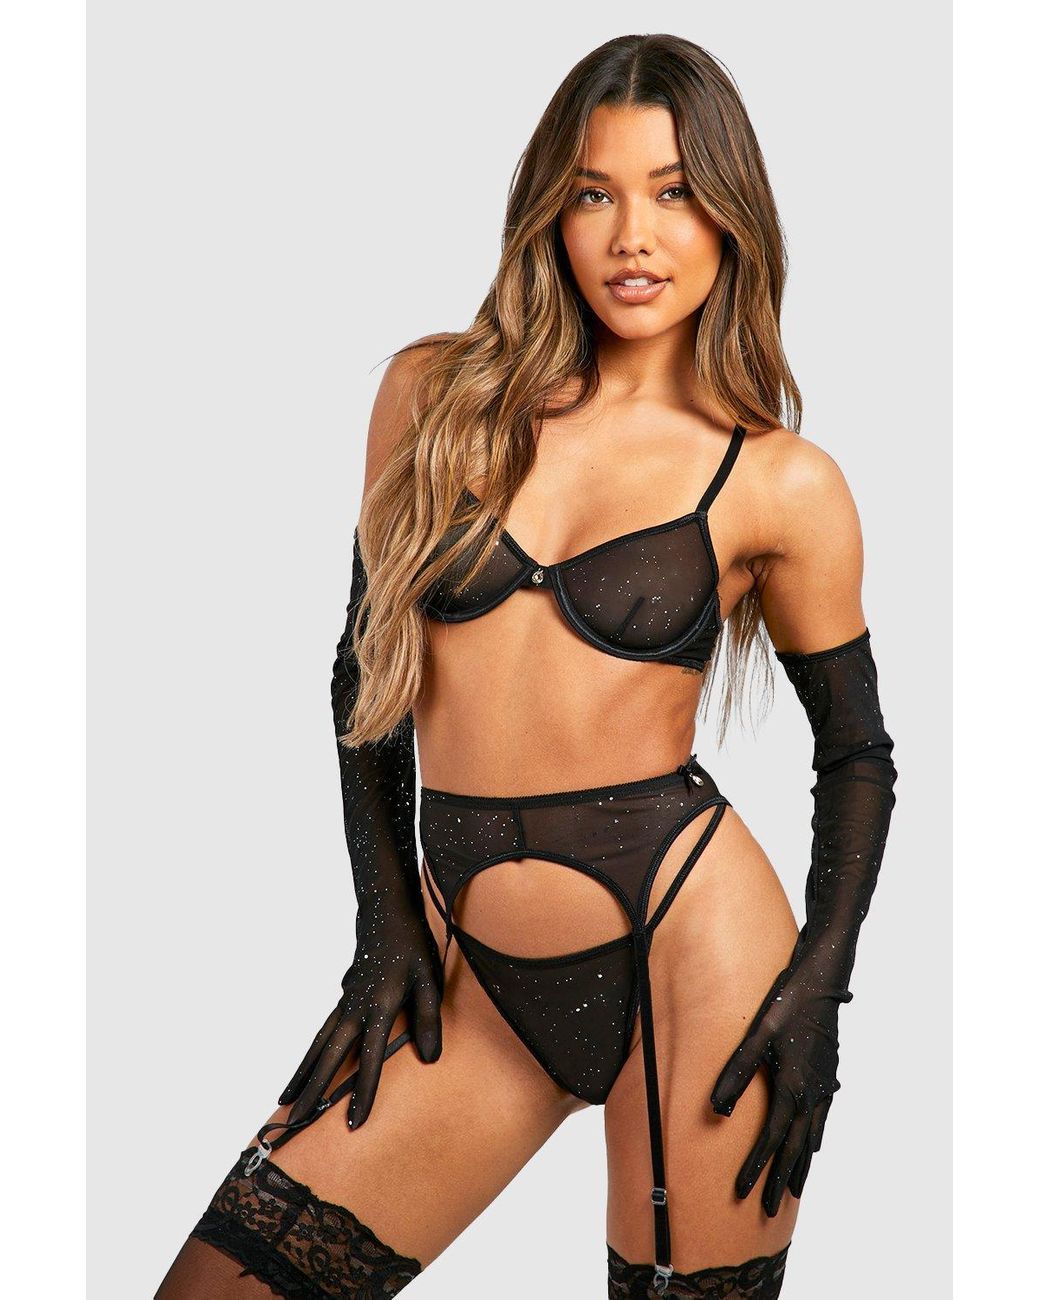 Boohoo Sparkle Lingerie And Suspender Set With Gloves in Black